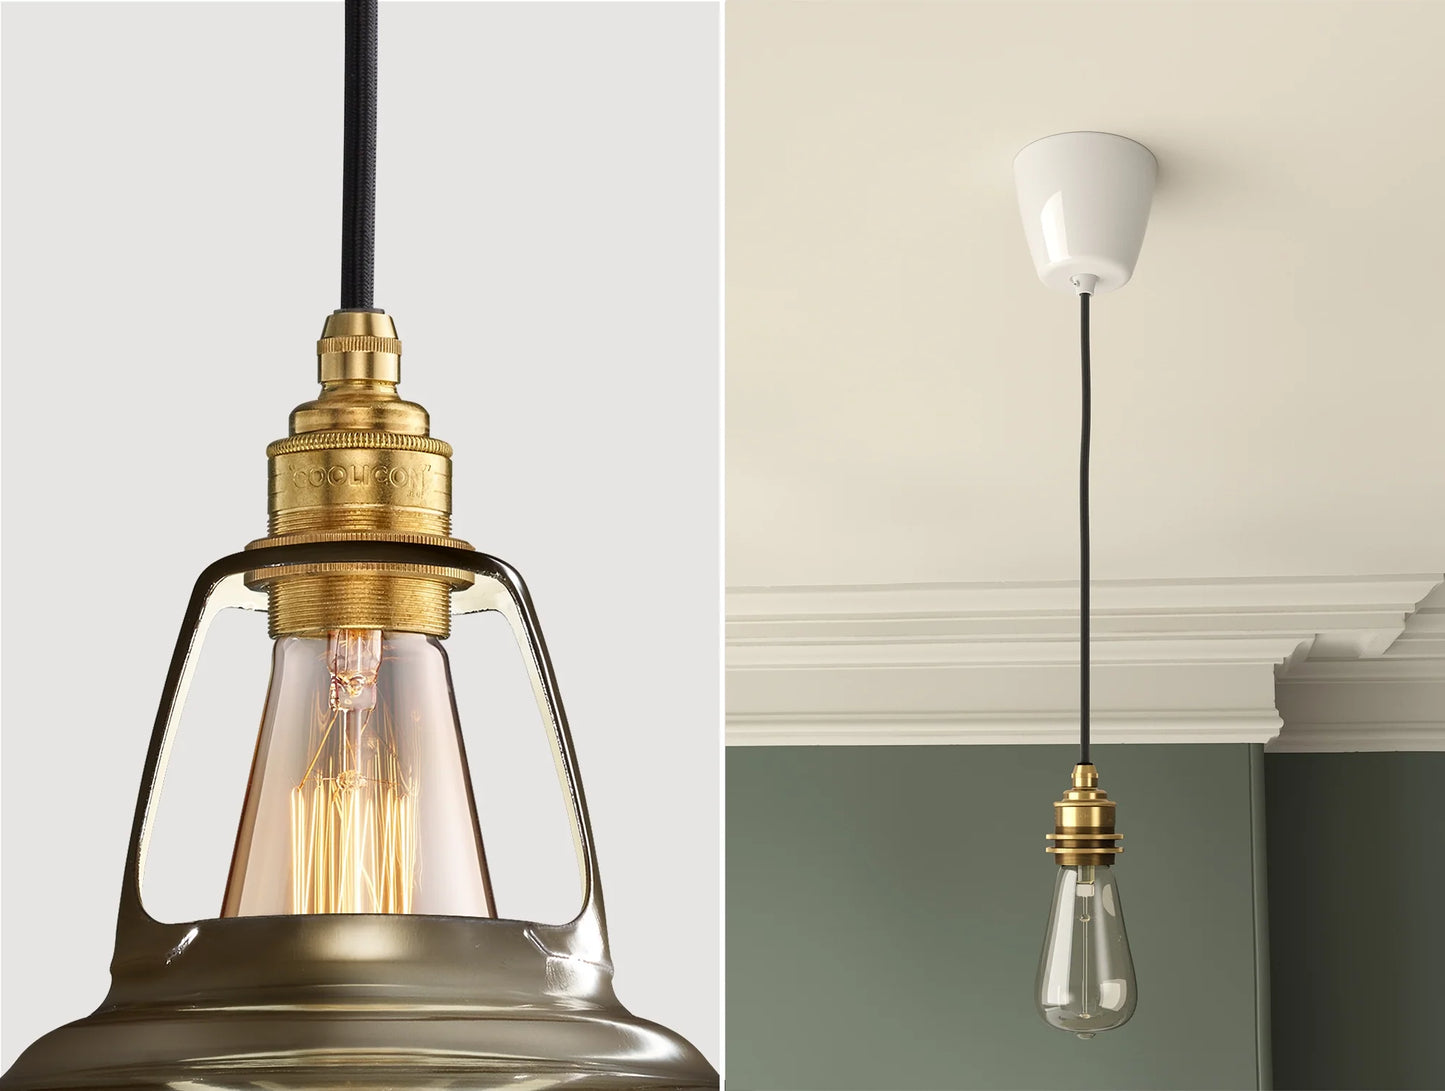 Close up of an E27 Brass suspension set on an Antinium shade on the left. On the right, an E27 Brass pendant set with a lightbulb is hanging from the ceiling